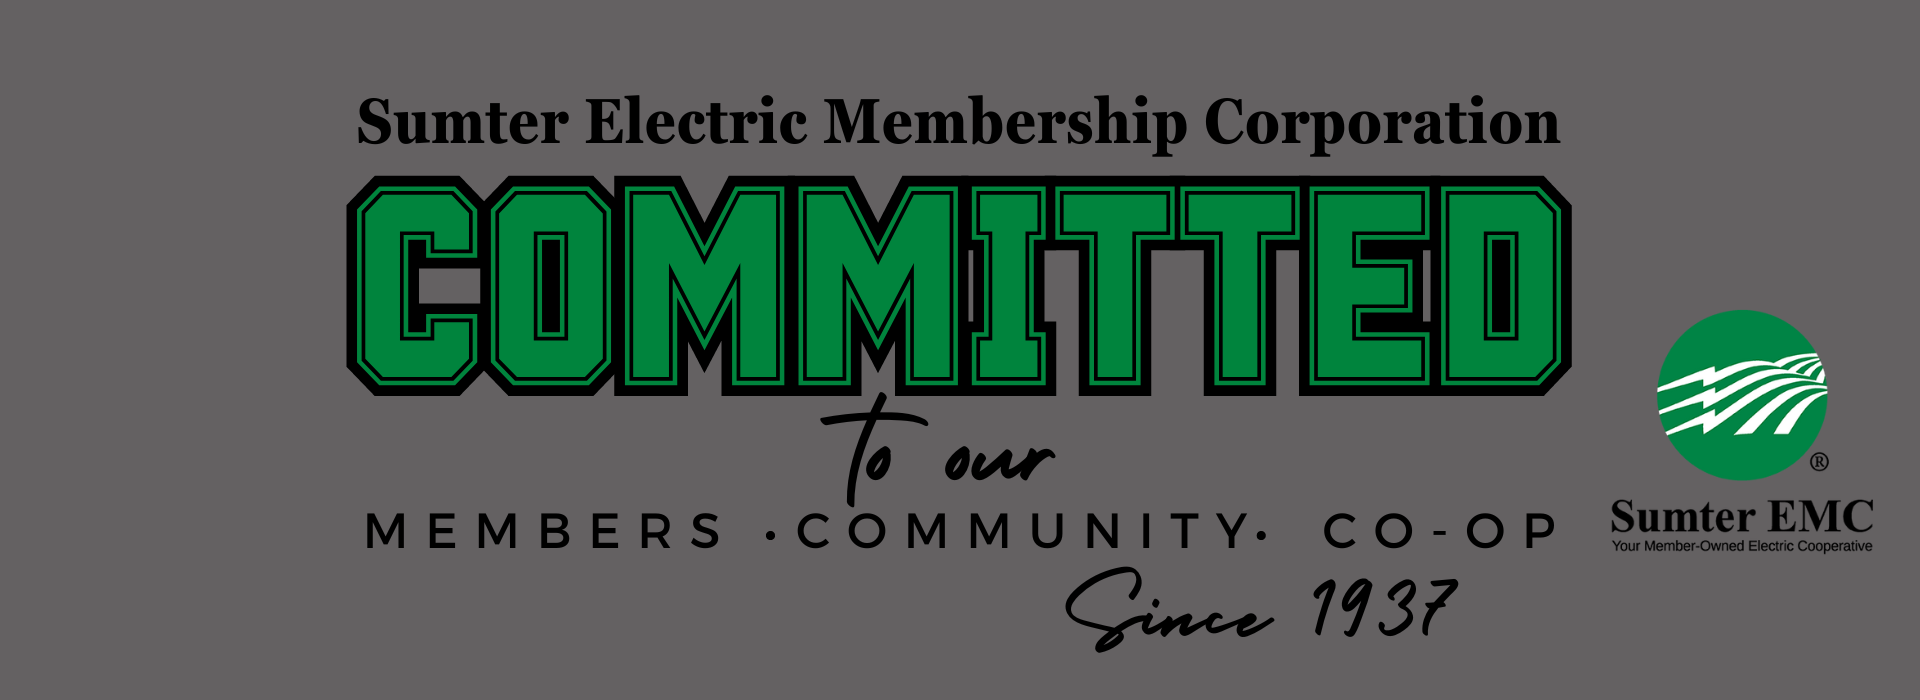 Committed to Our Members, Community, and Co-Op